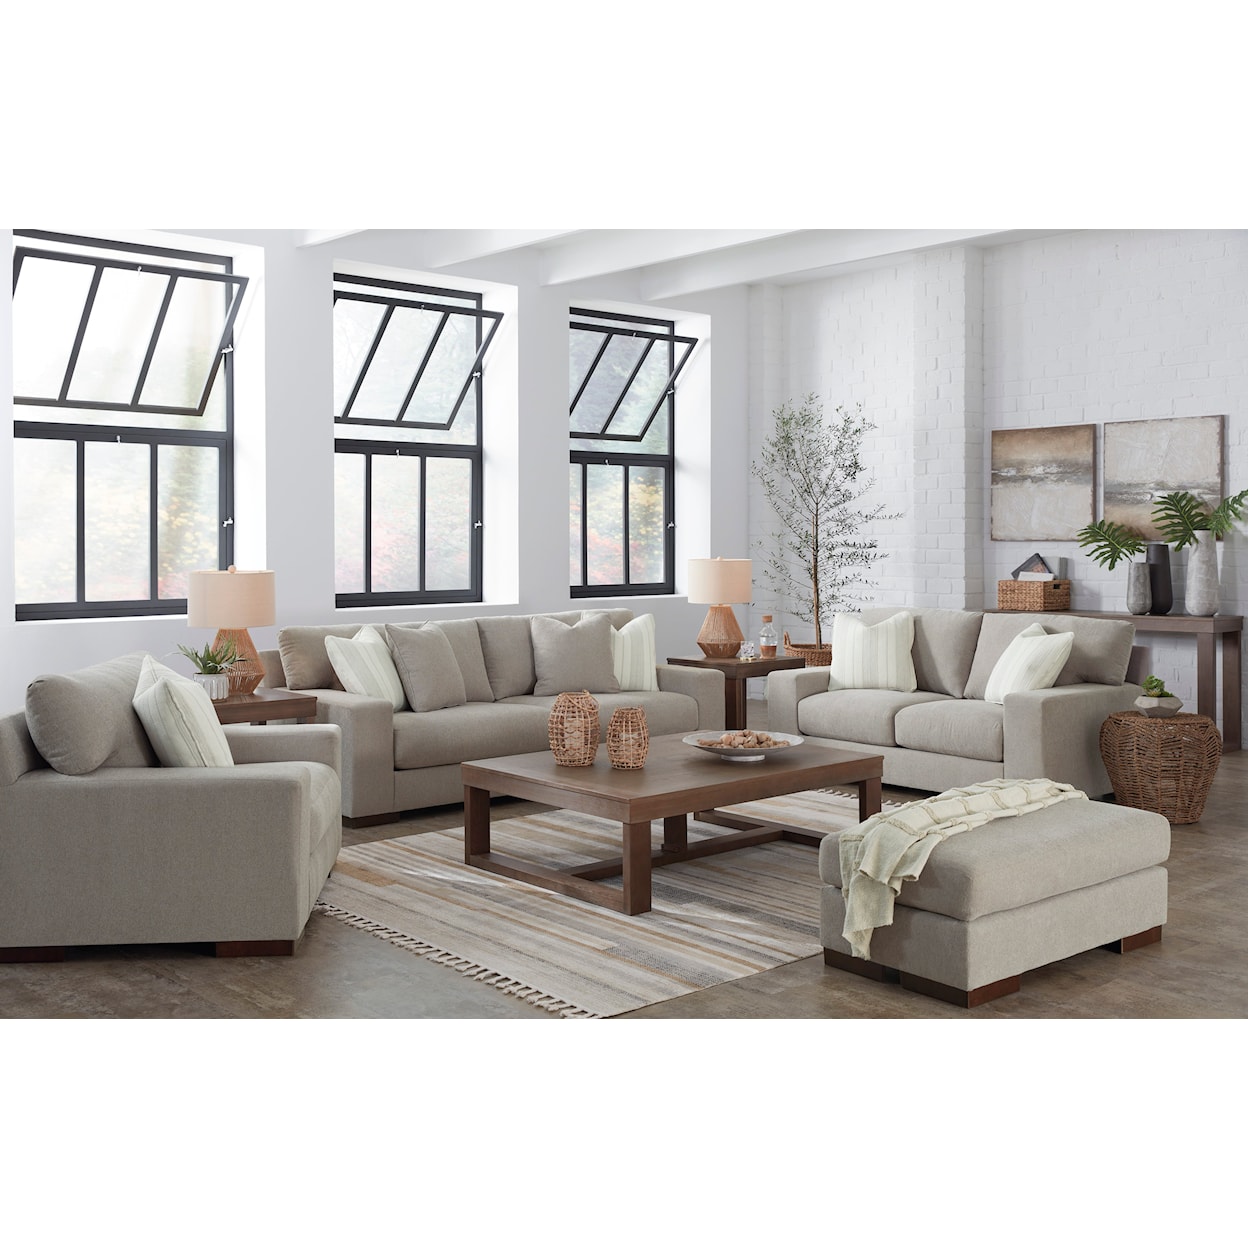 Signature Design by Ashley Maggie 2 Piece Living Room Set